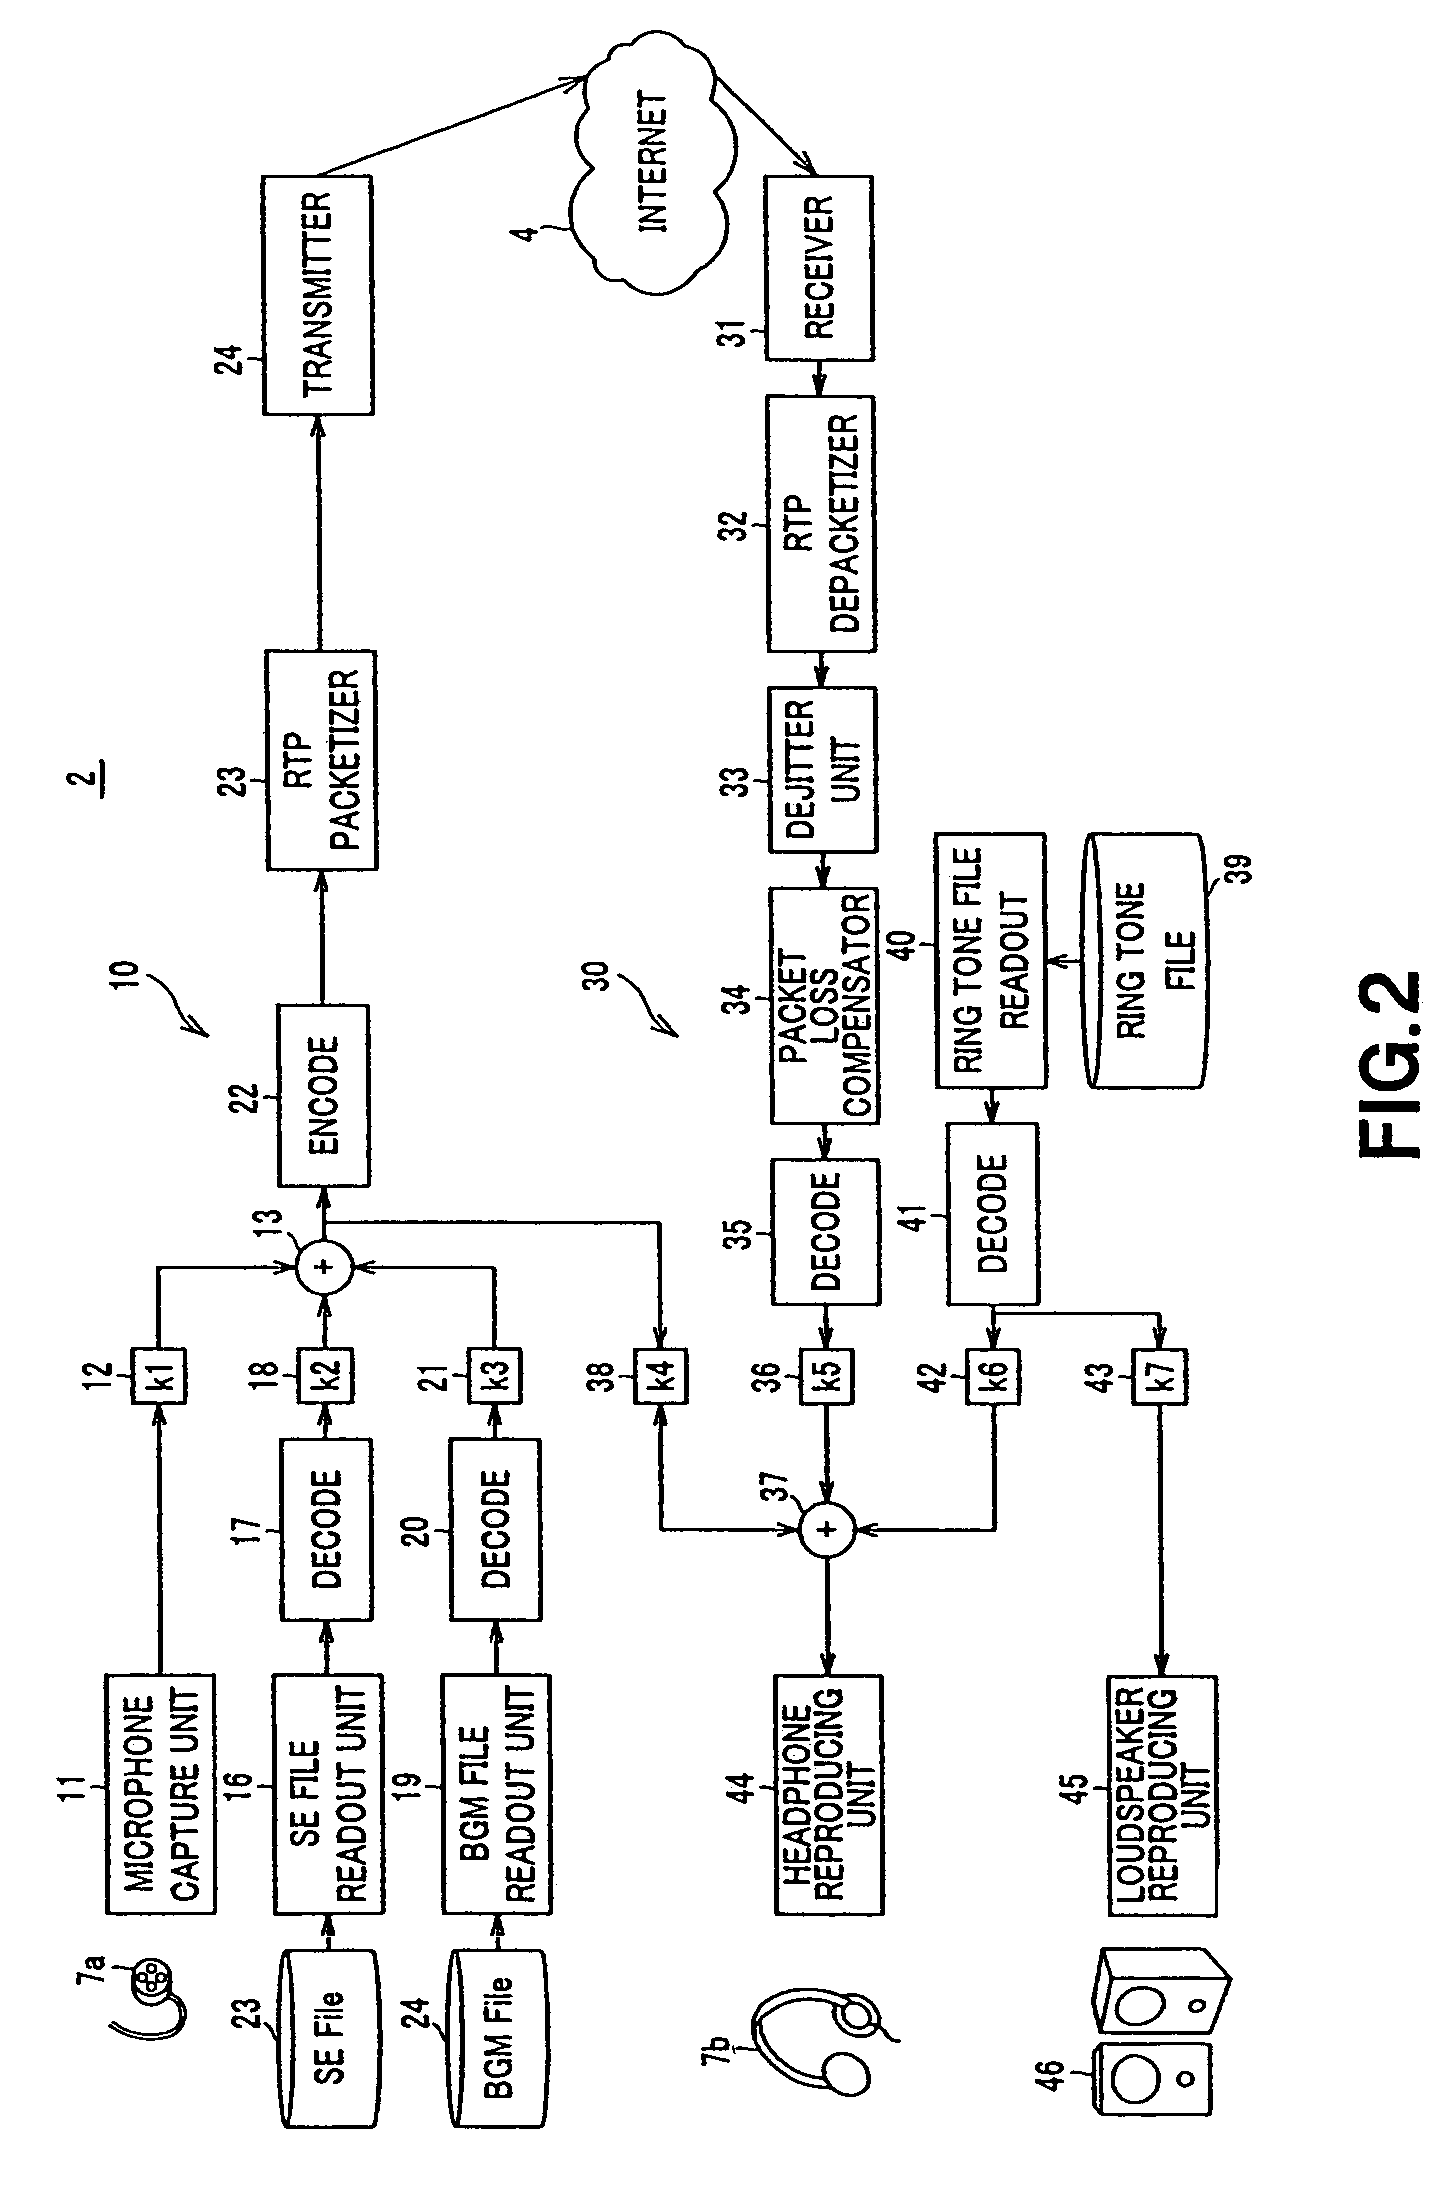 Call method, call apparatus and call system